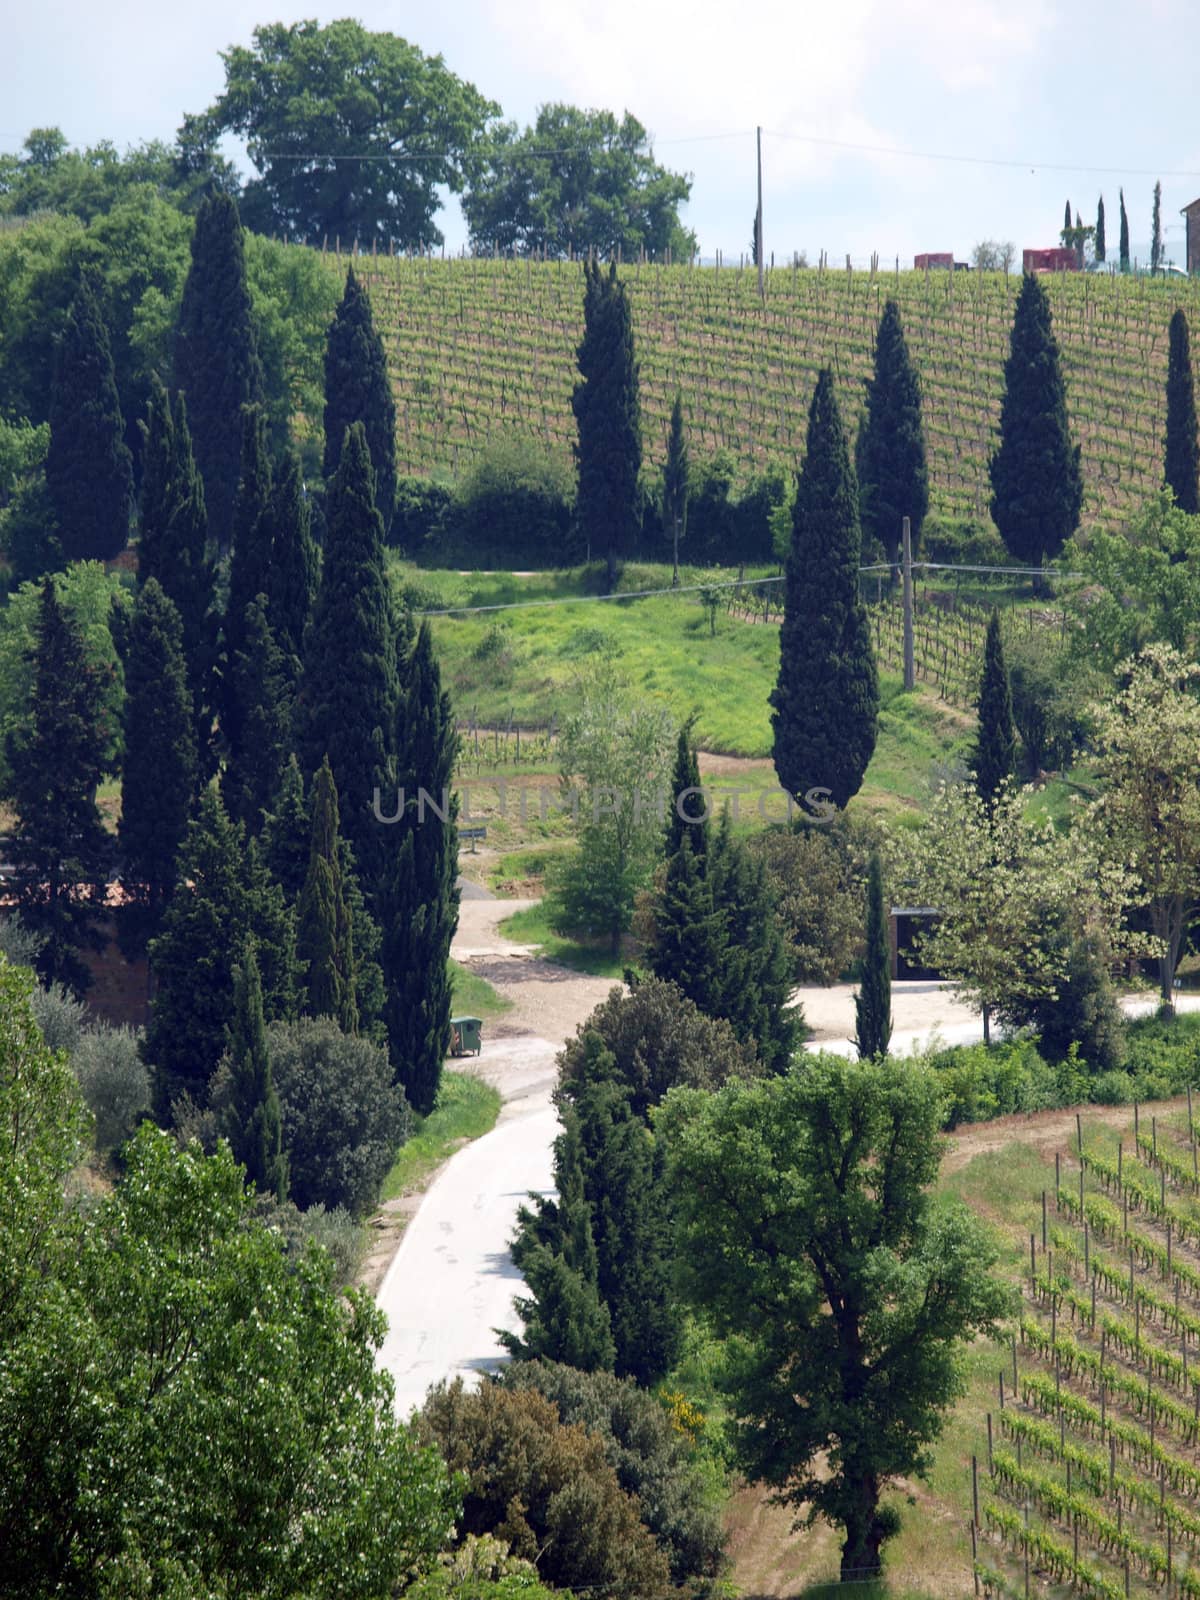 Tuscan landscape with vineyards and cypresses